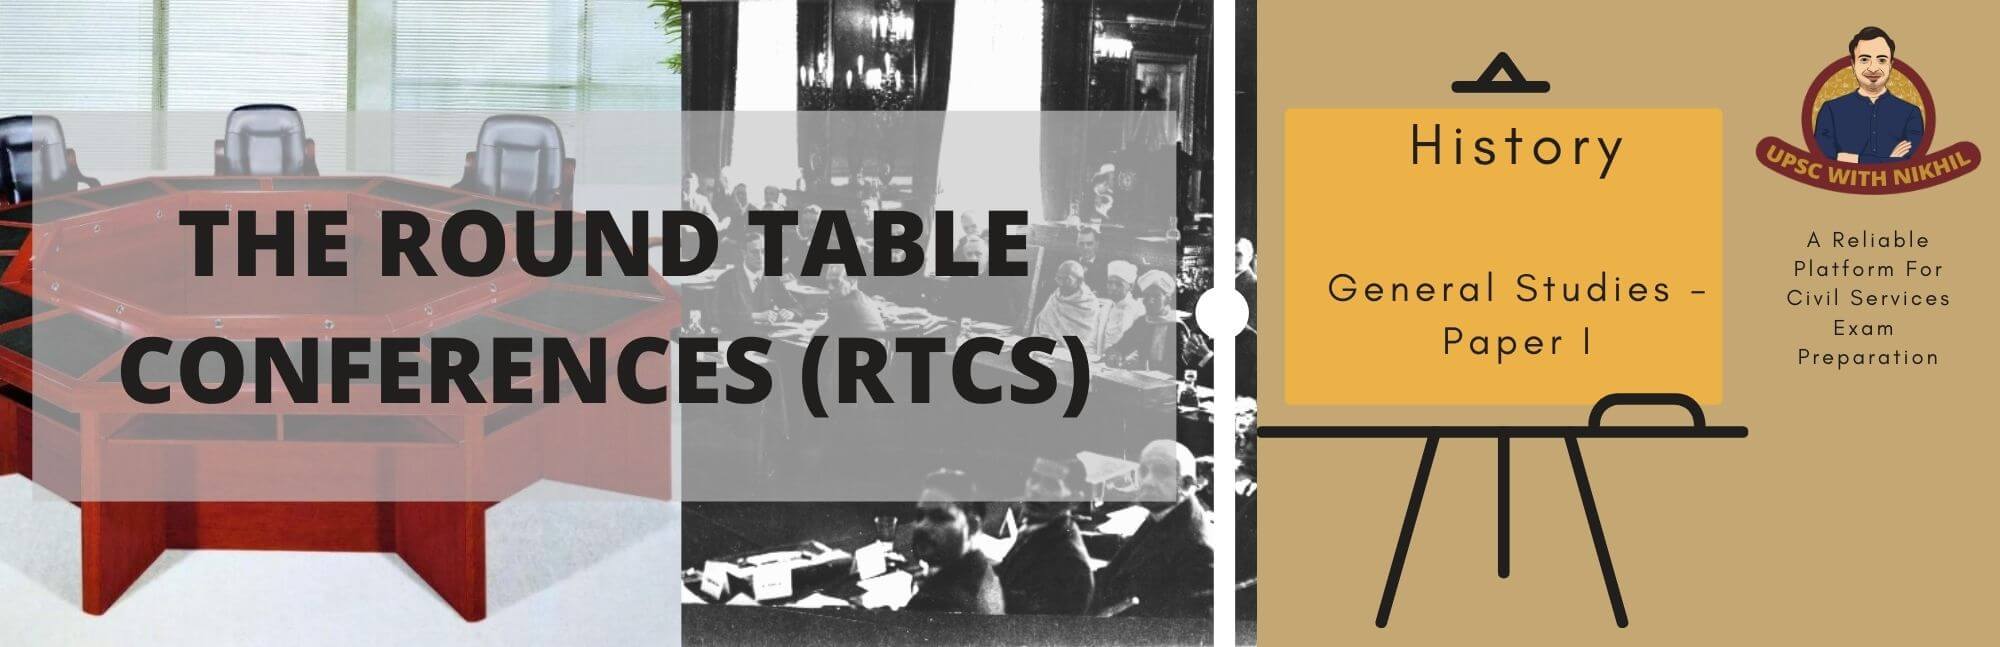 The Round Table Conferences Rtcs, Where The First Round Table Conference Was Held Today